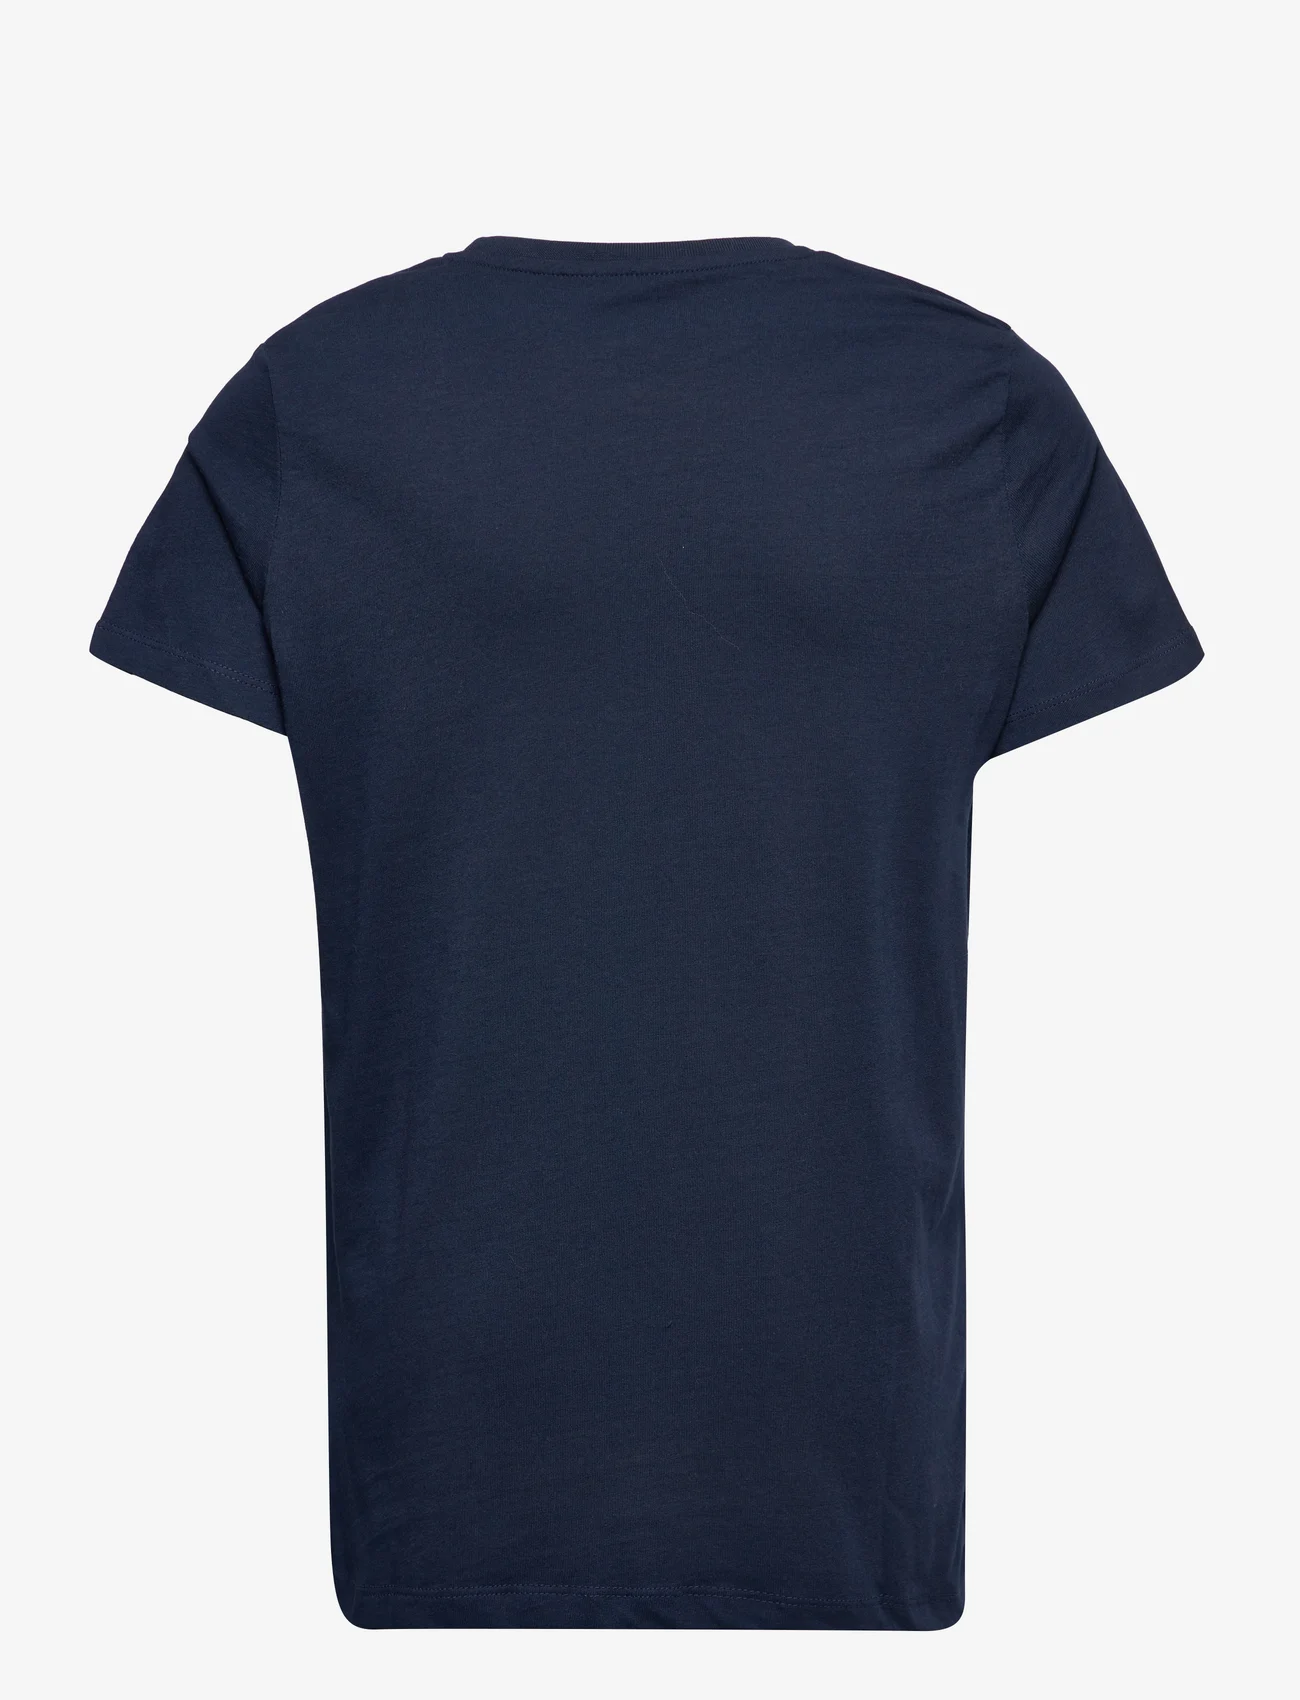 Kronstadt - Timmi Recycled - short-sleeved t-shirts - navy - 1